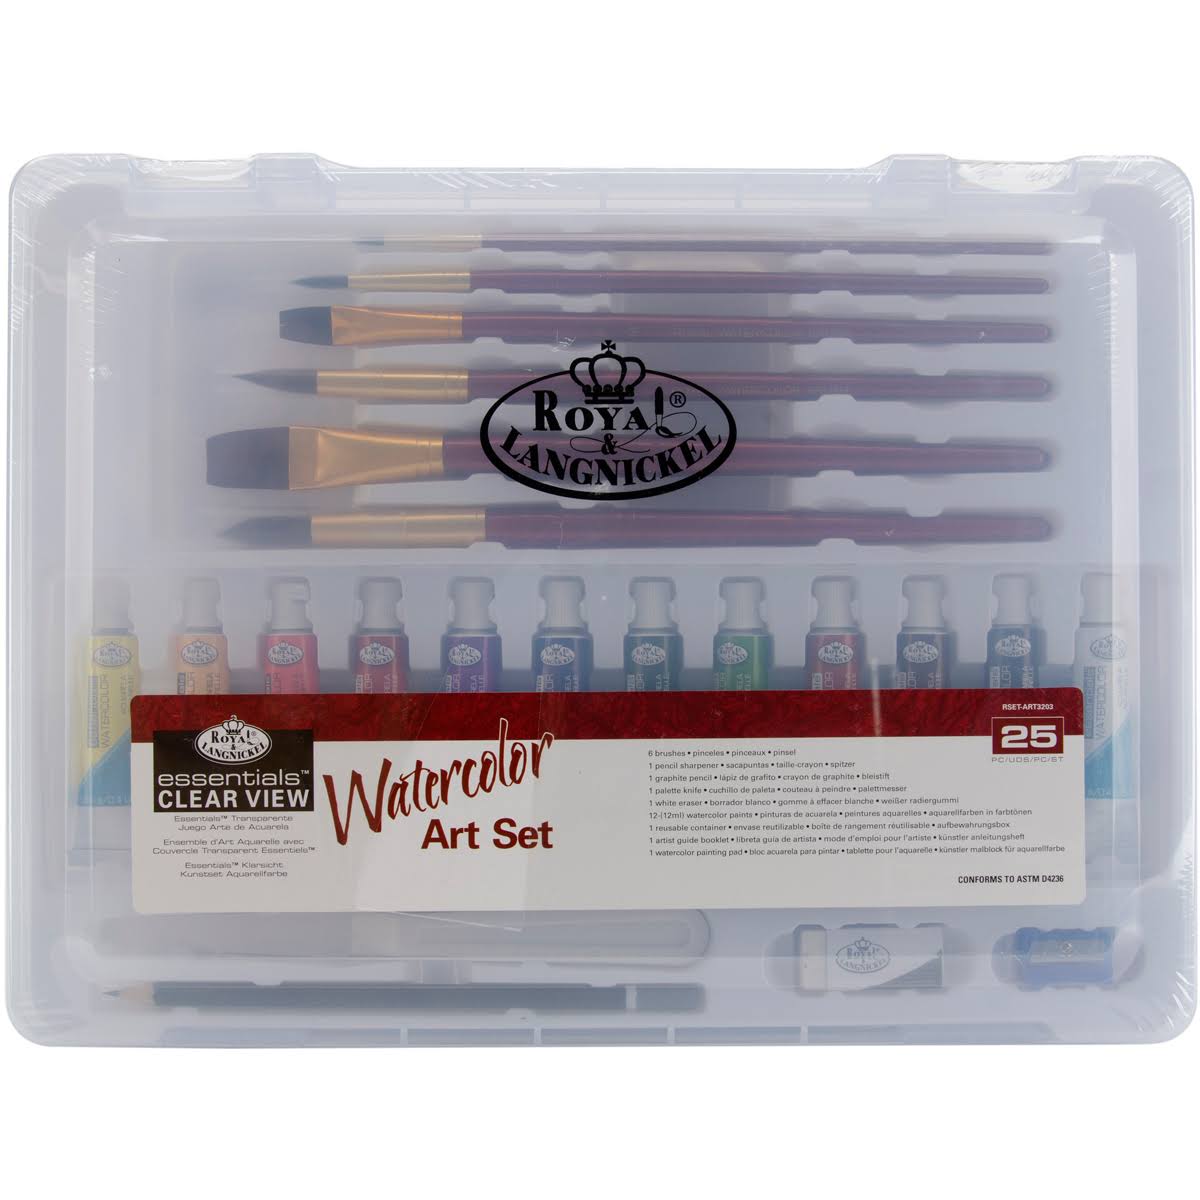 Essentials Clear View Art Set-Watercolor Painting - Royal Brush